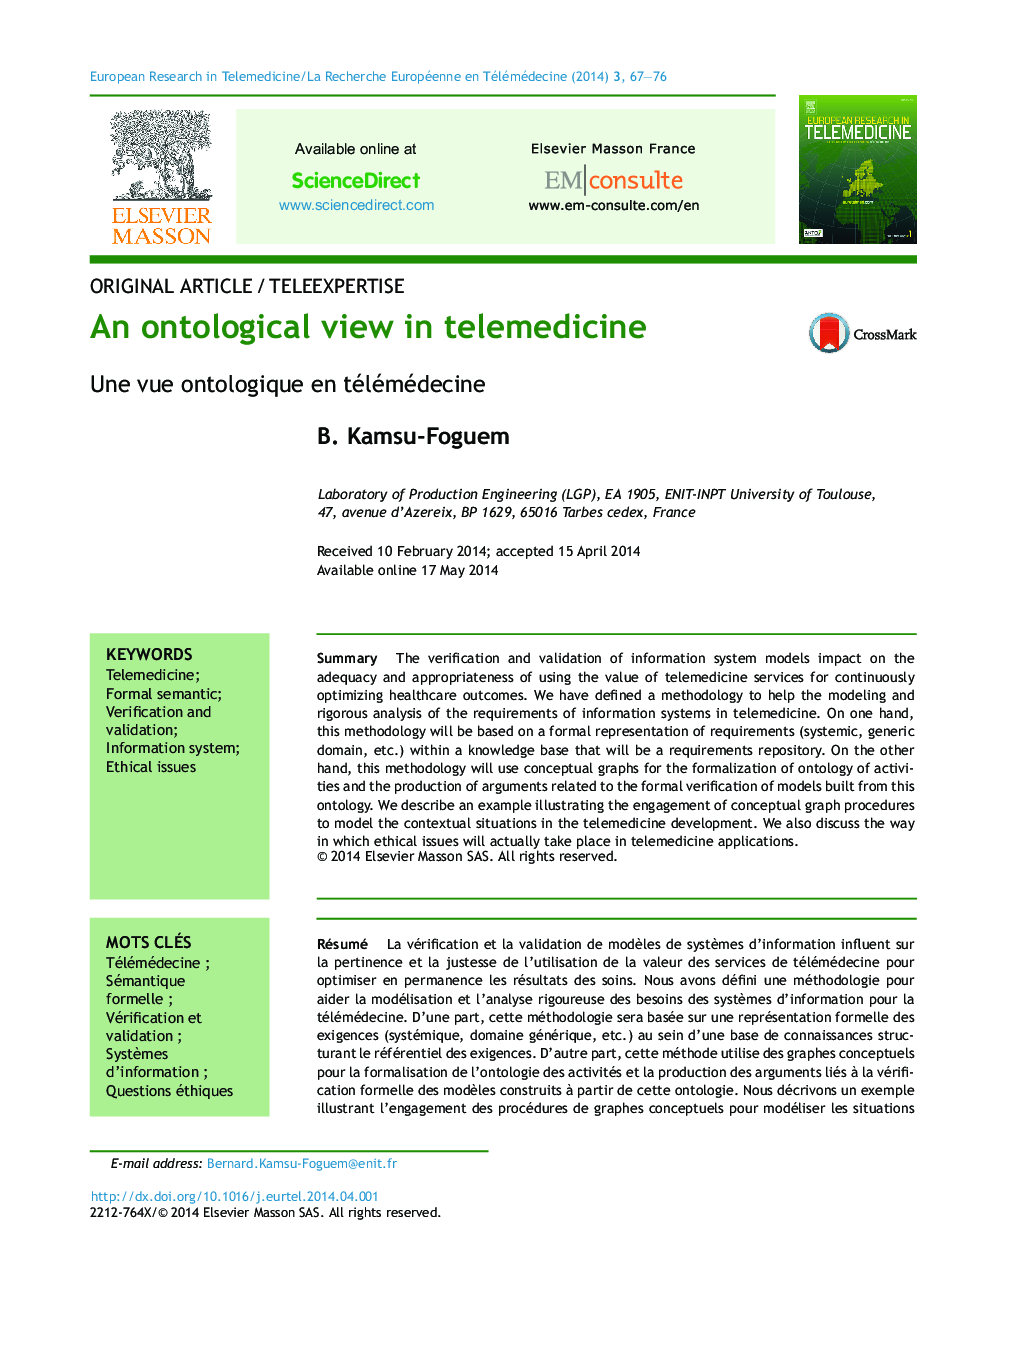 An ontological view in telemedicine